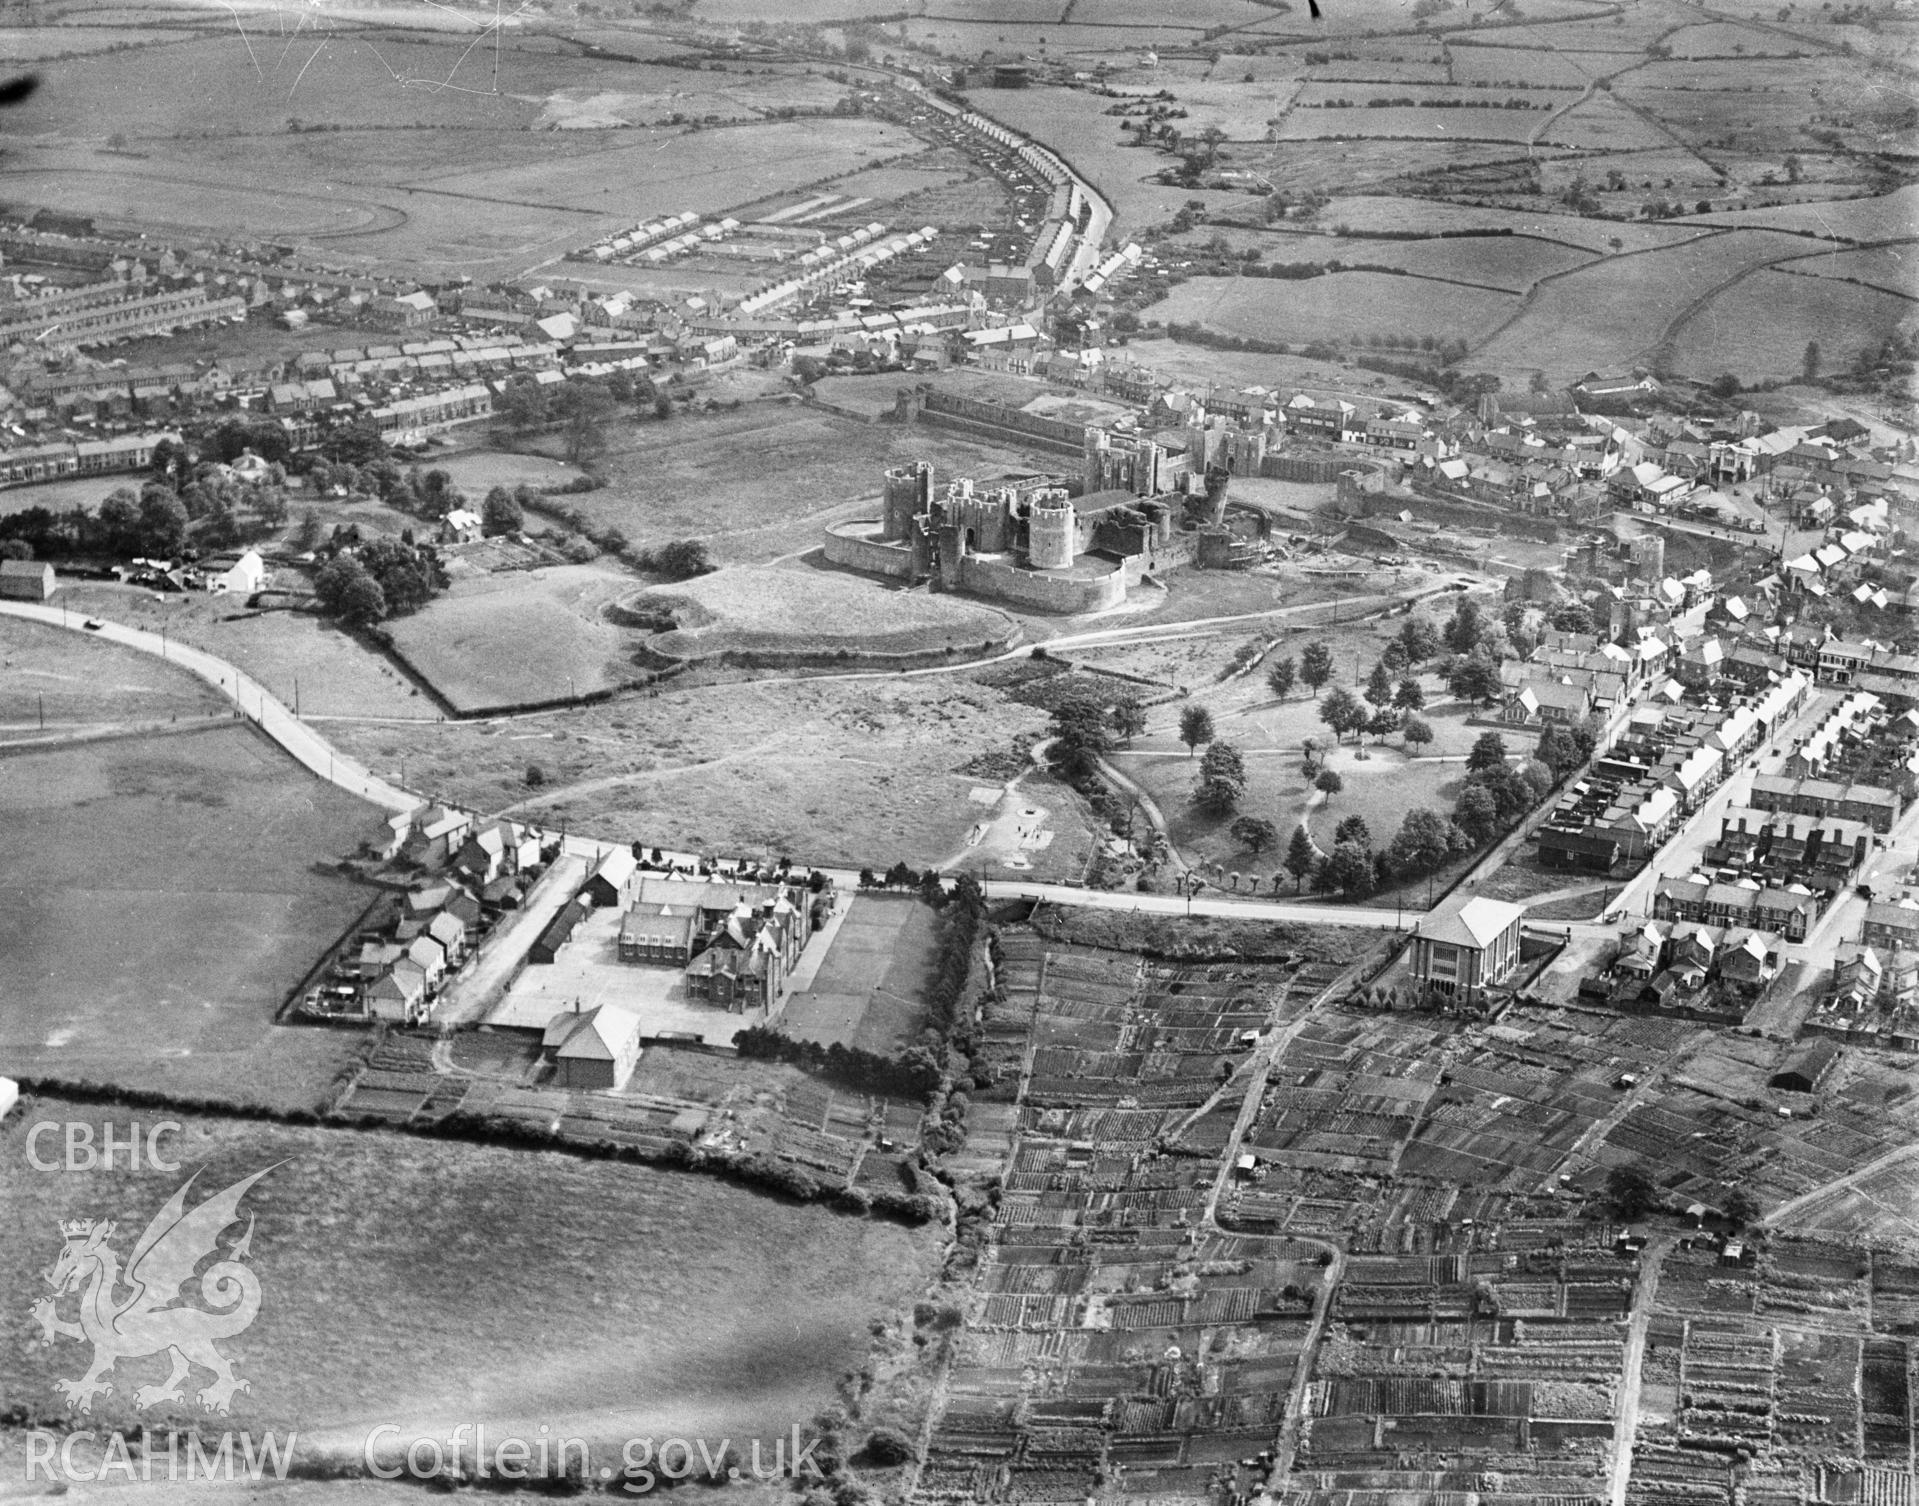 View of Caerphilly showing school, allotments and castle. Oblique aerial photograph, 5?x4? BW glass plate.